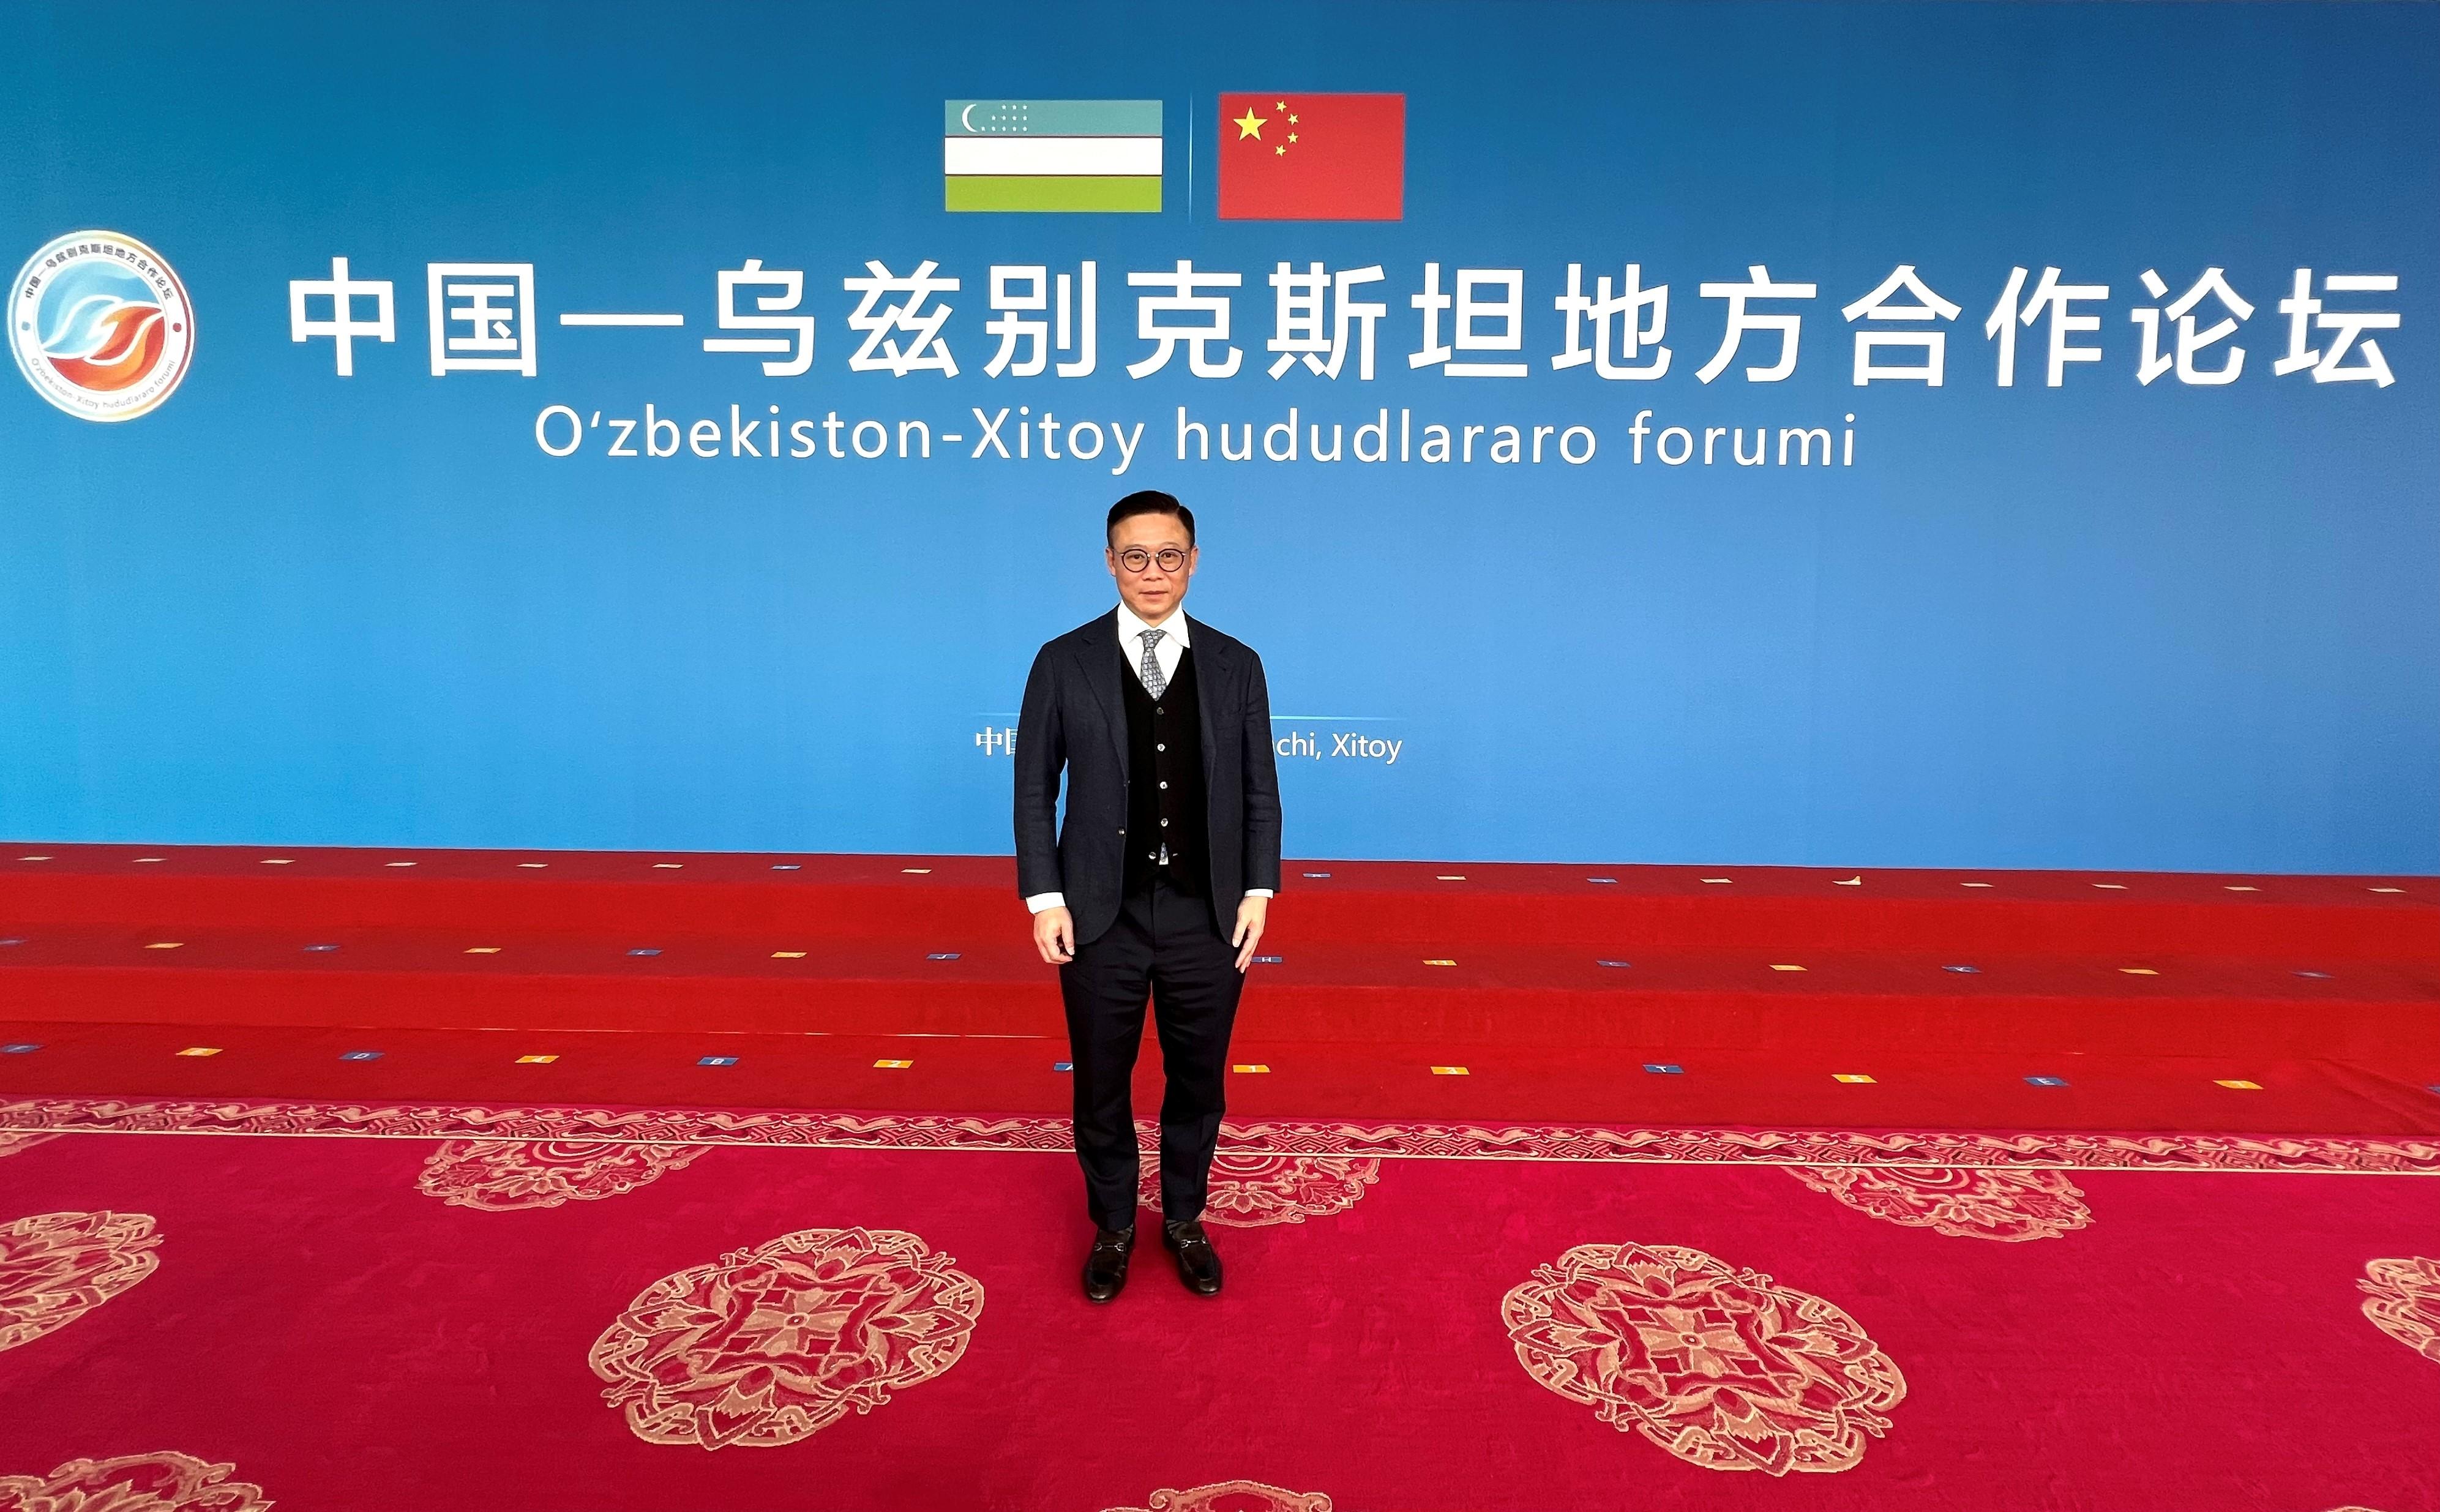 The Deputy Secretary for Justice, Mr Cheung Kwok-kwan, led a Hong Kong Special Administrative Region delegation to participate in a forum on China-Uzbekistan co-operation in Urumqi, Xinjiang today (January 22). Photo shows Mr Cheung at the forum.
